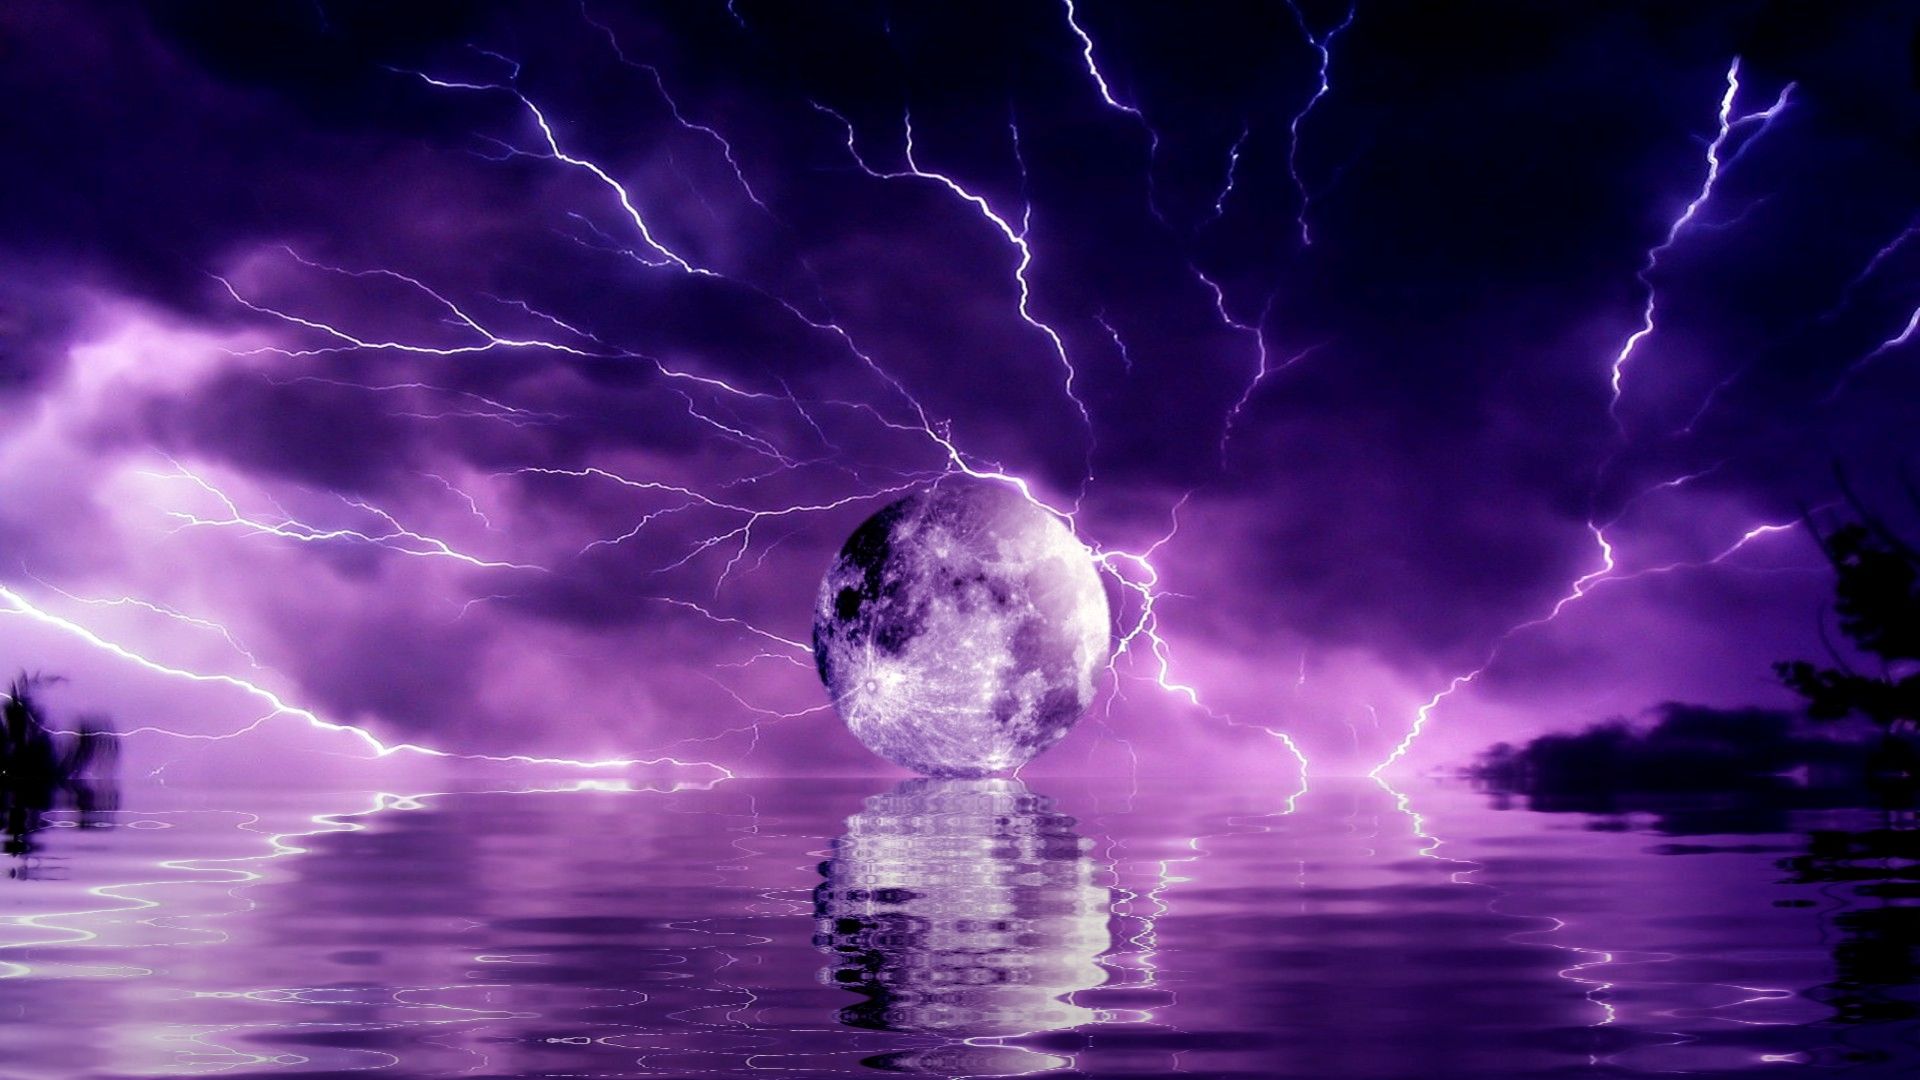 Animated Storm Wallpaper photo Cool Natural Storm Animated Background. 雲